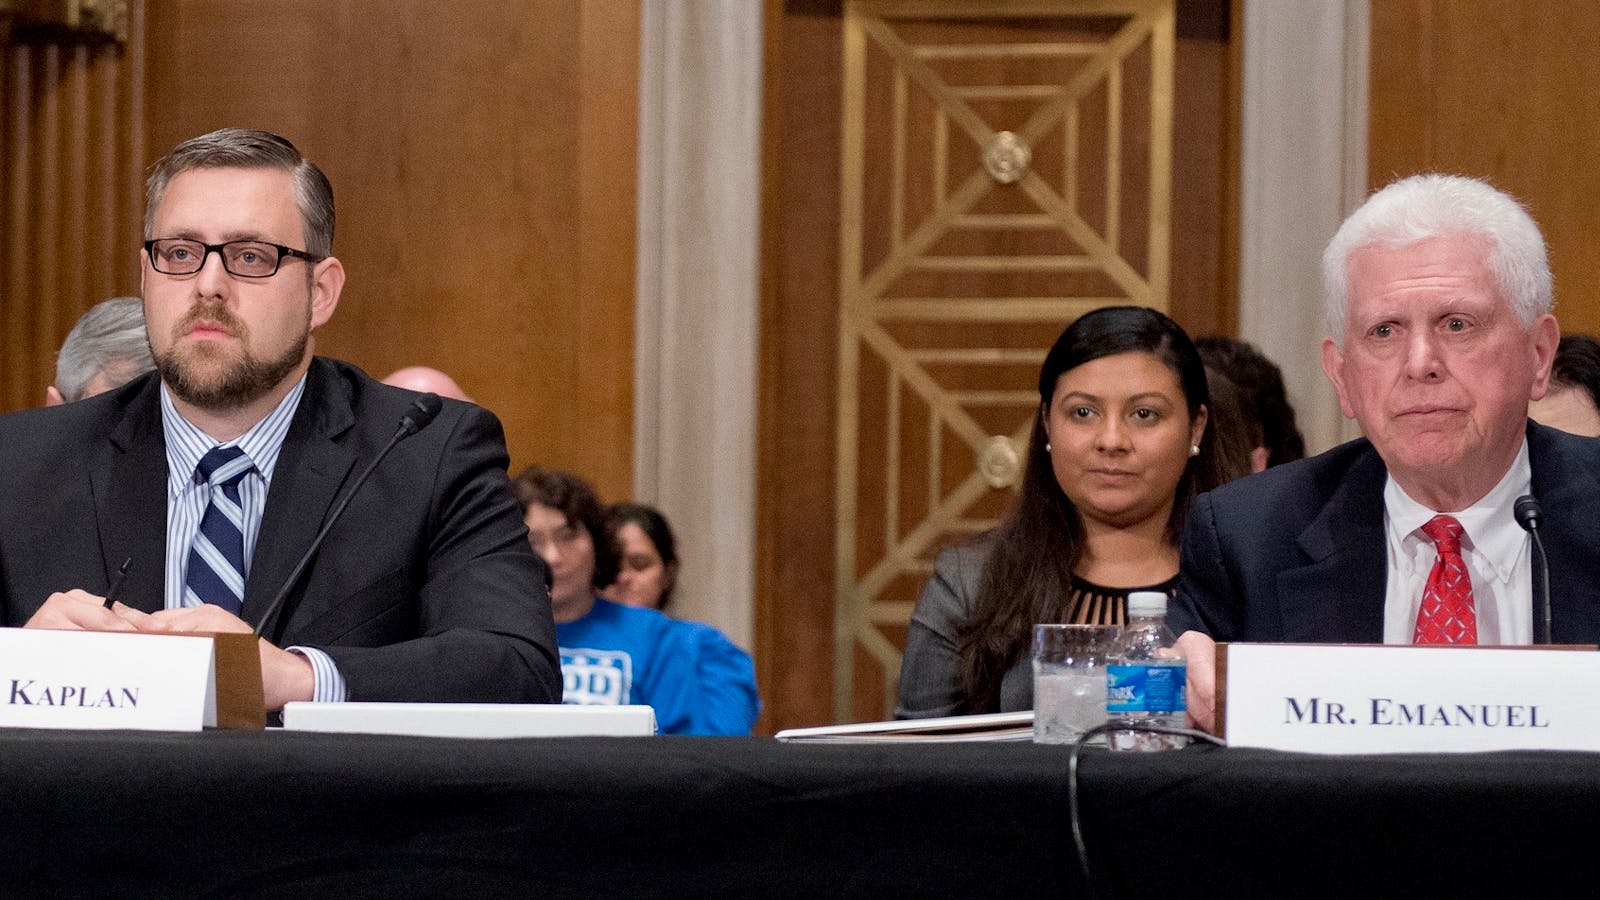 Marvin Kaplan and William Emanuel, President Trump's two nominees to the National Labor Relations Board, at the Senate hearing considering their nomination. Photo by AP. 